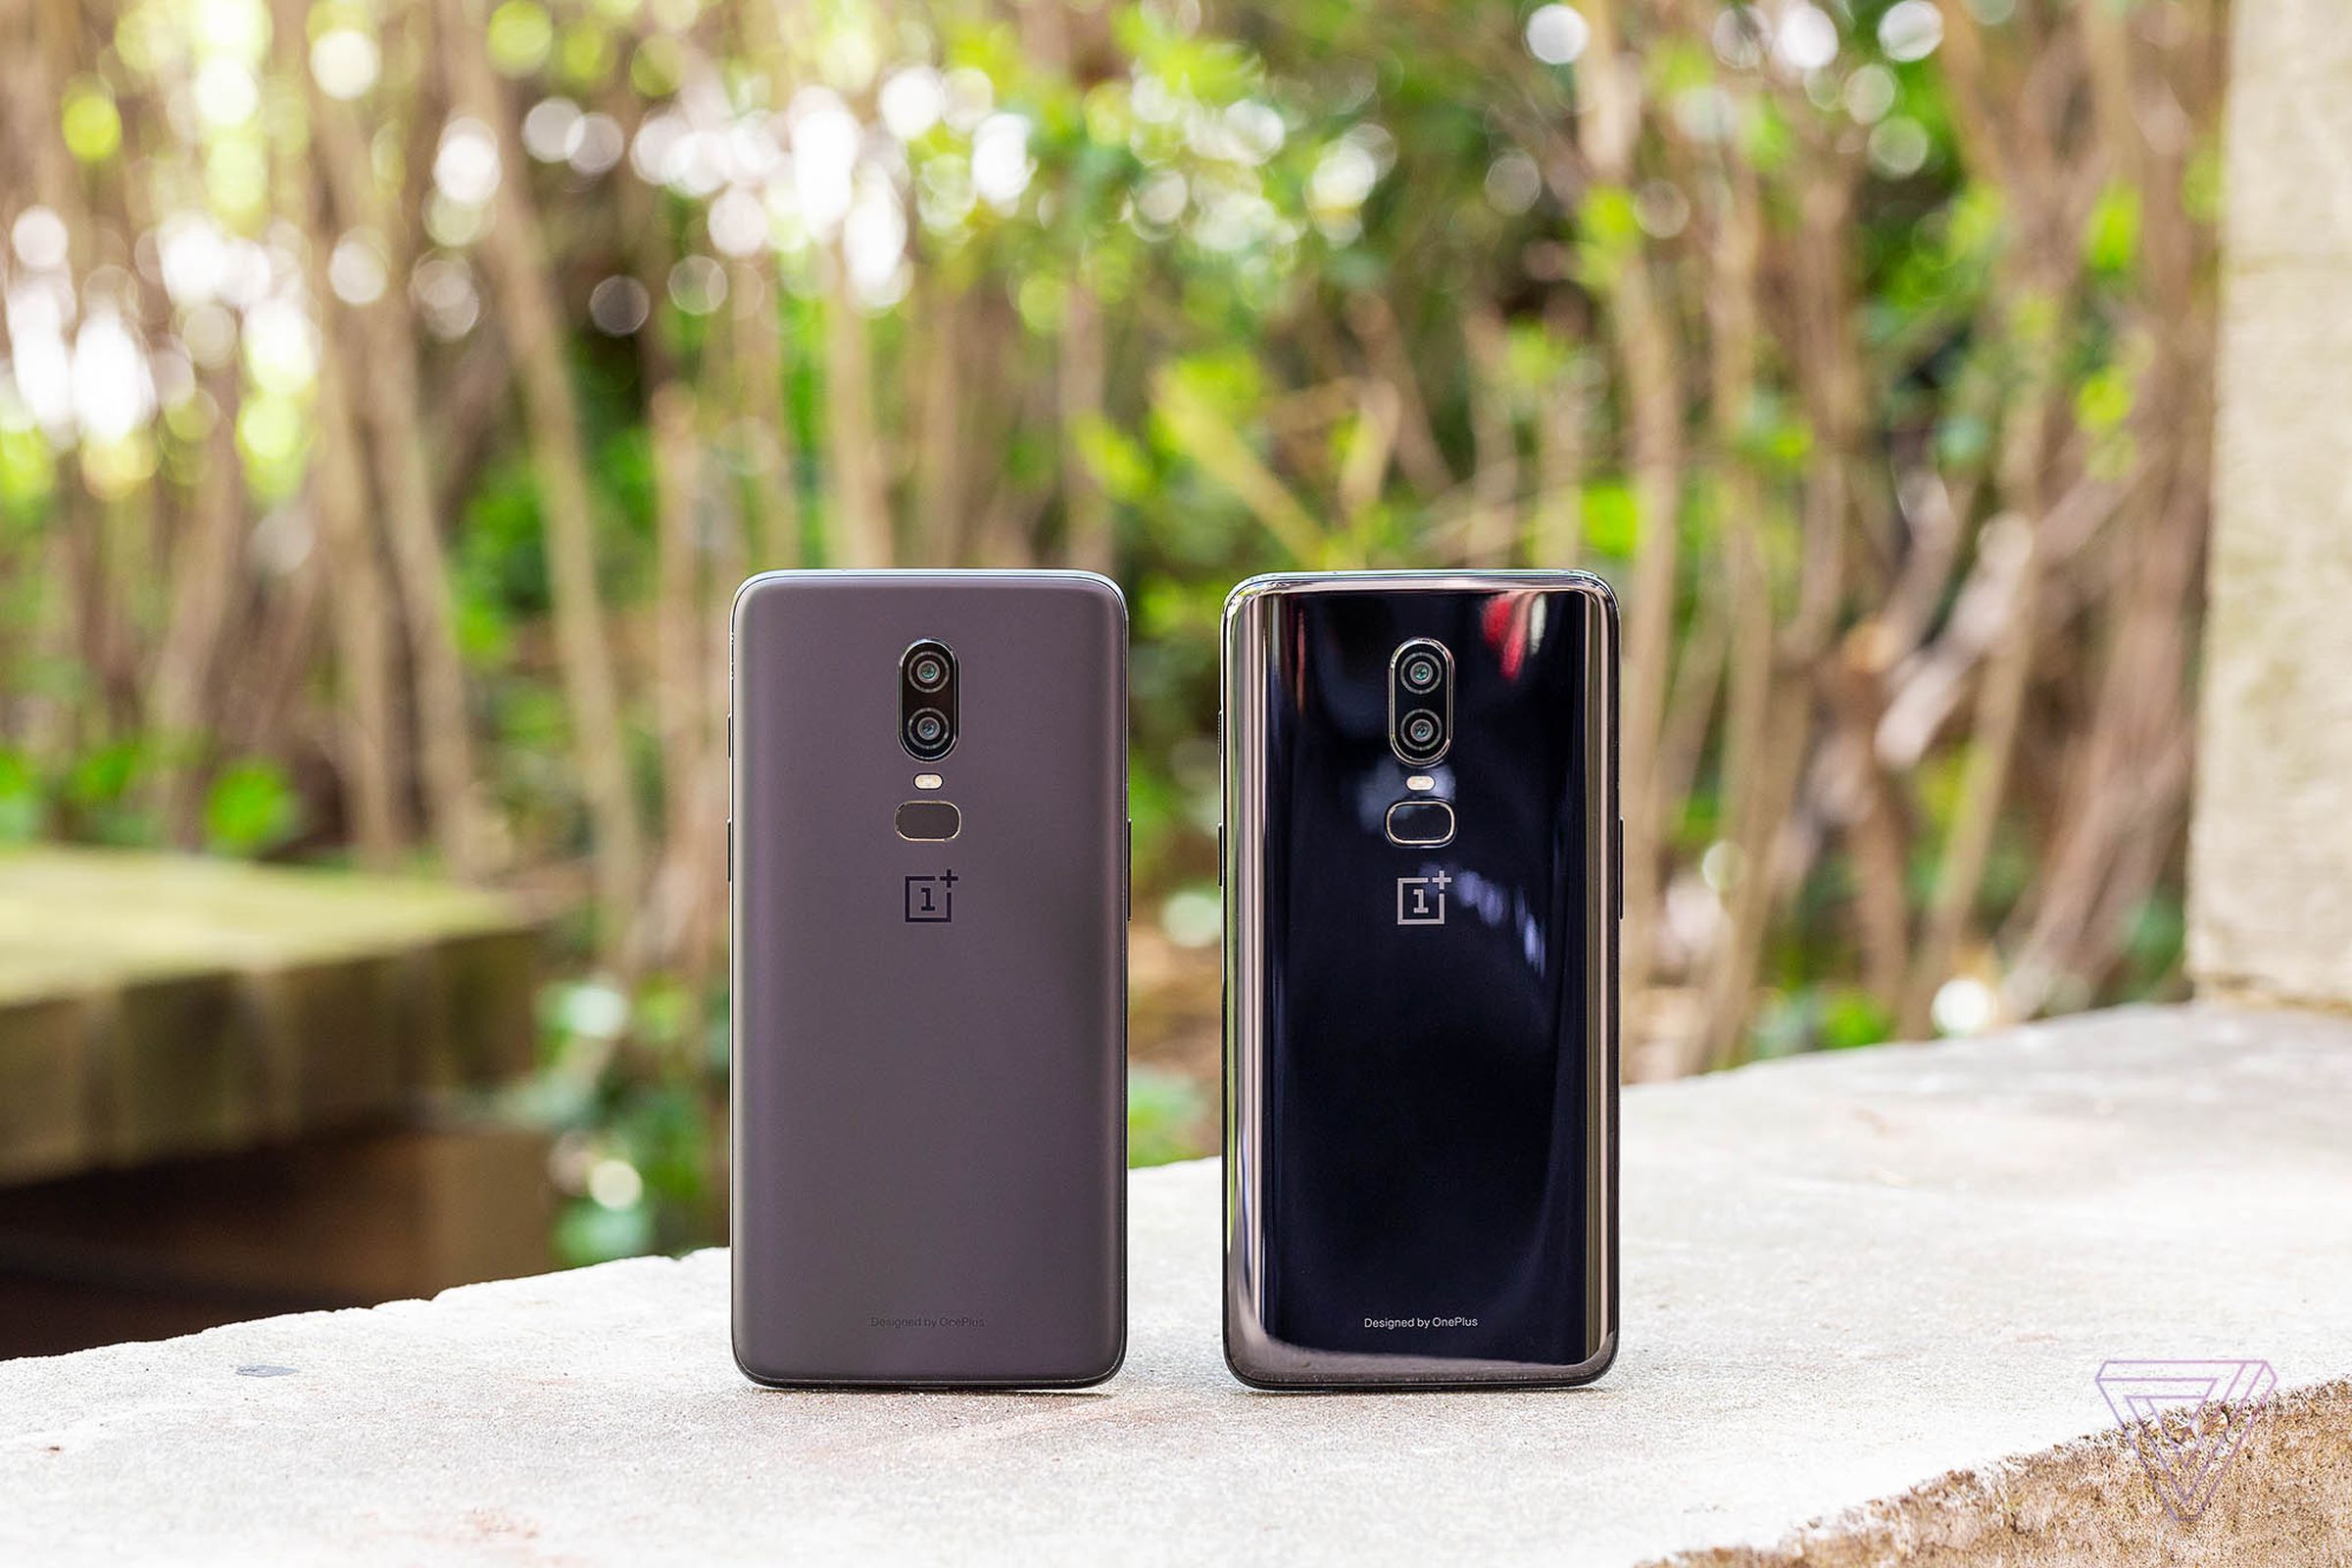 OnePlus 6 in midnight black (left) and mirror black (right).